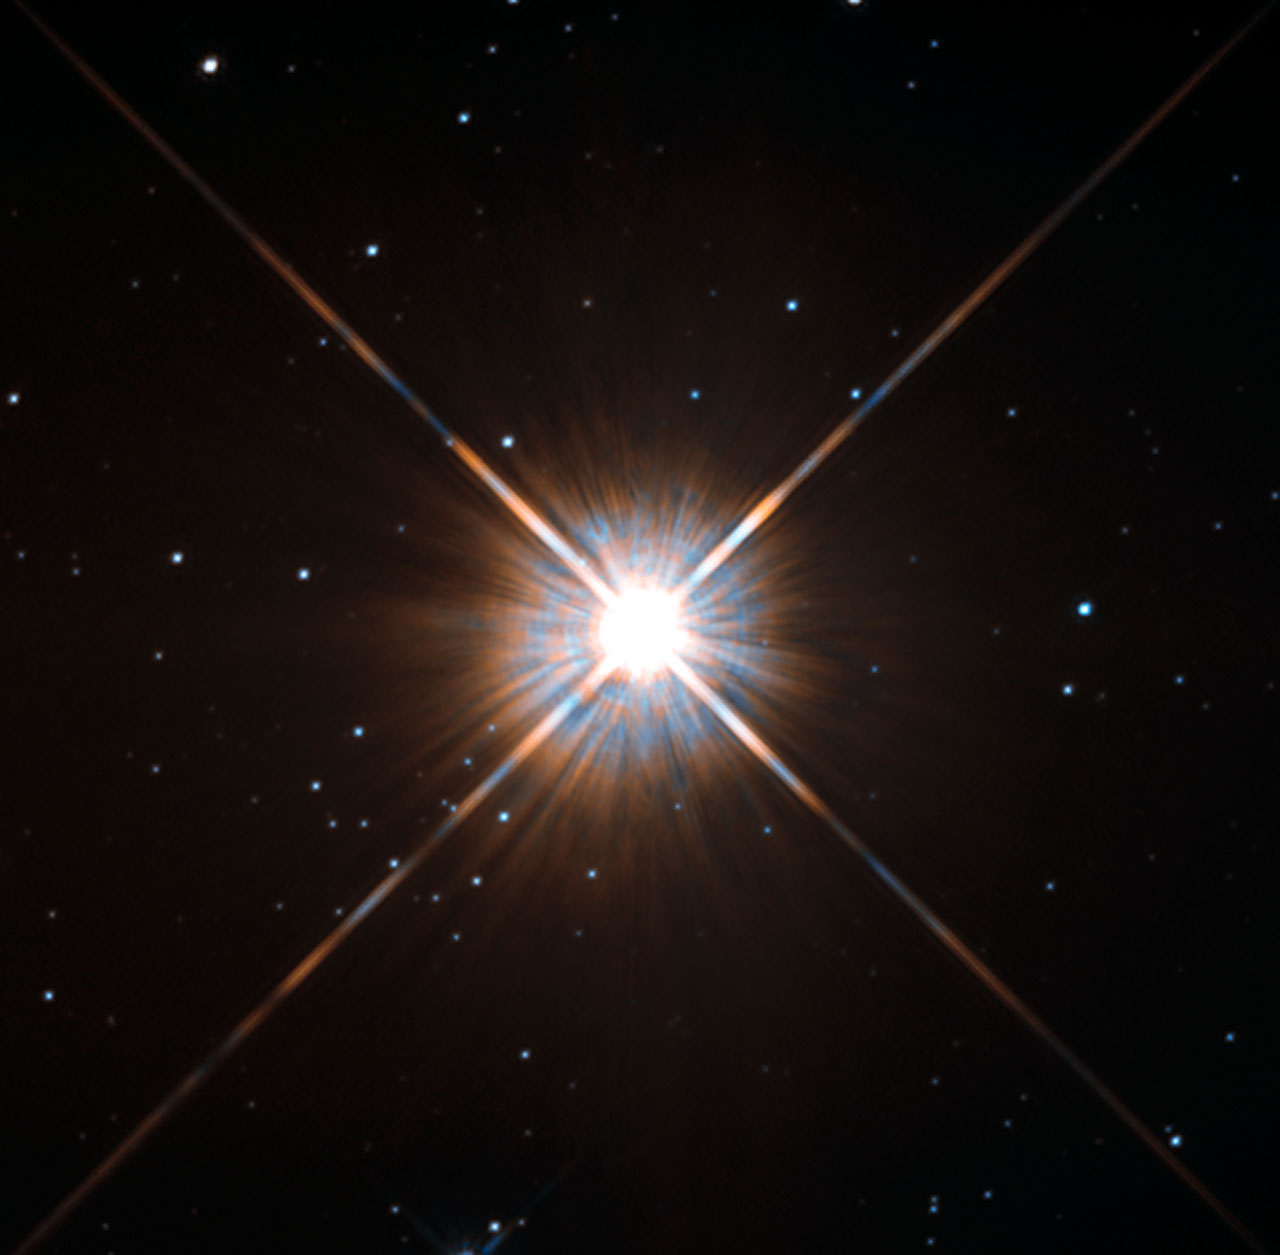 Hubble image of a red dwarf star